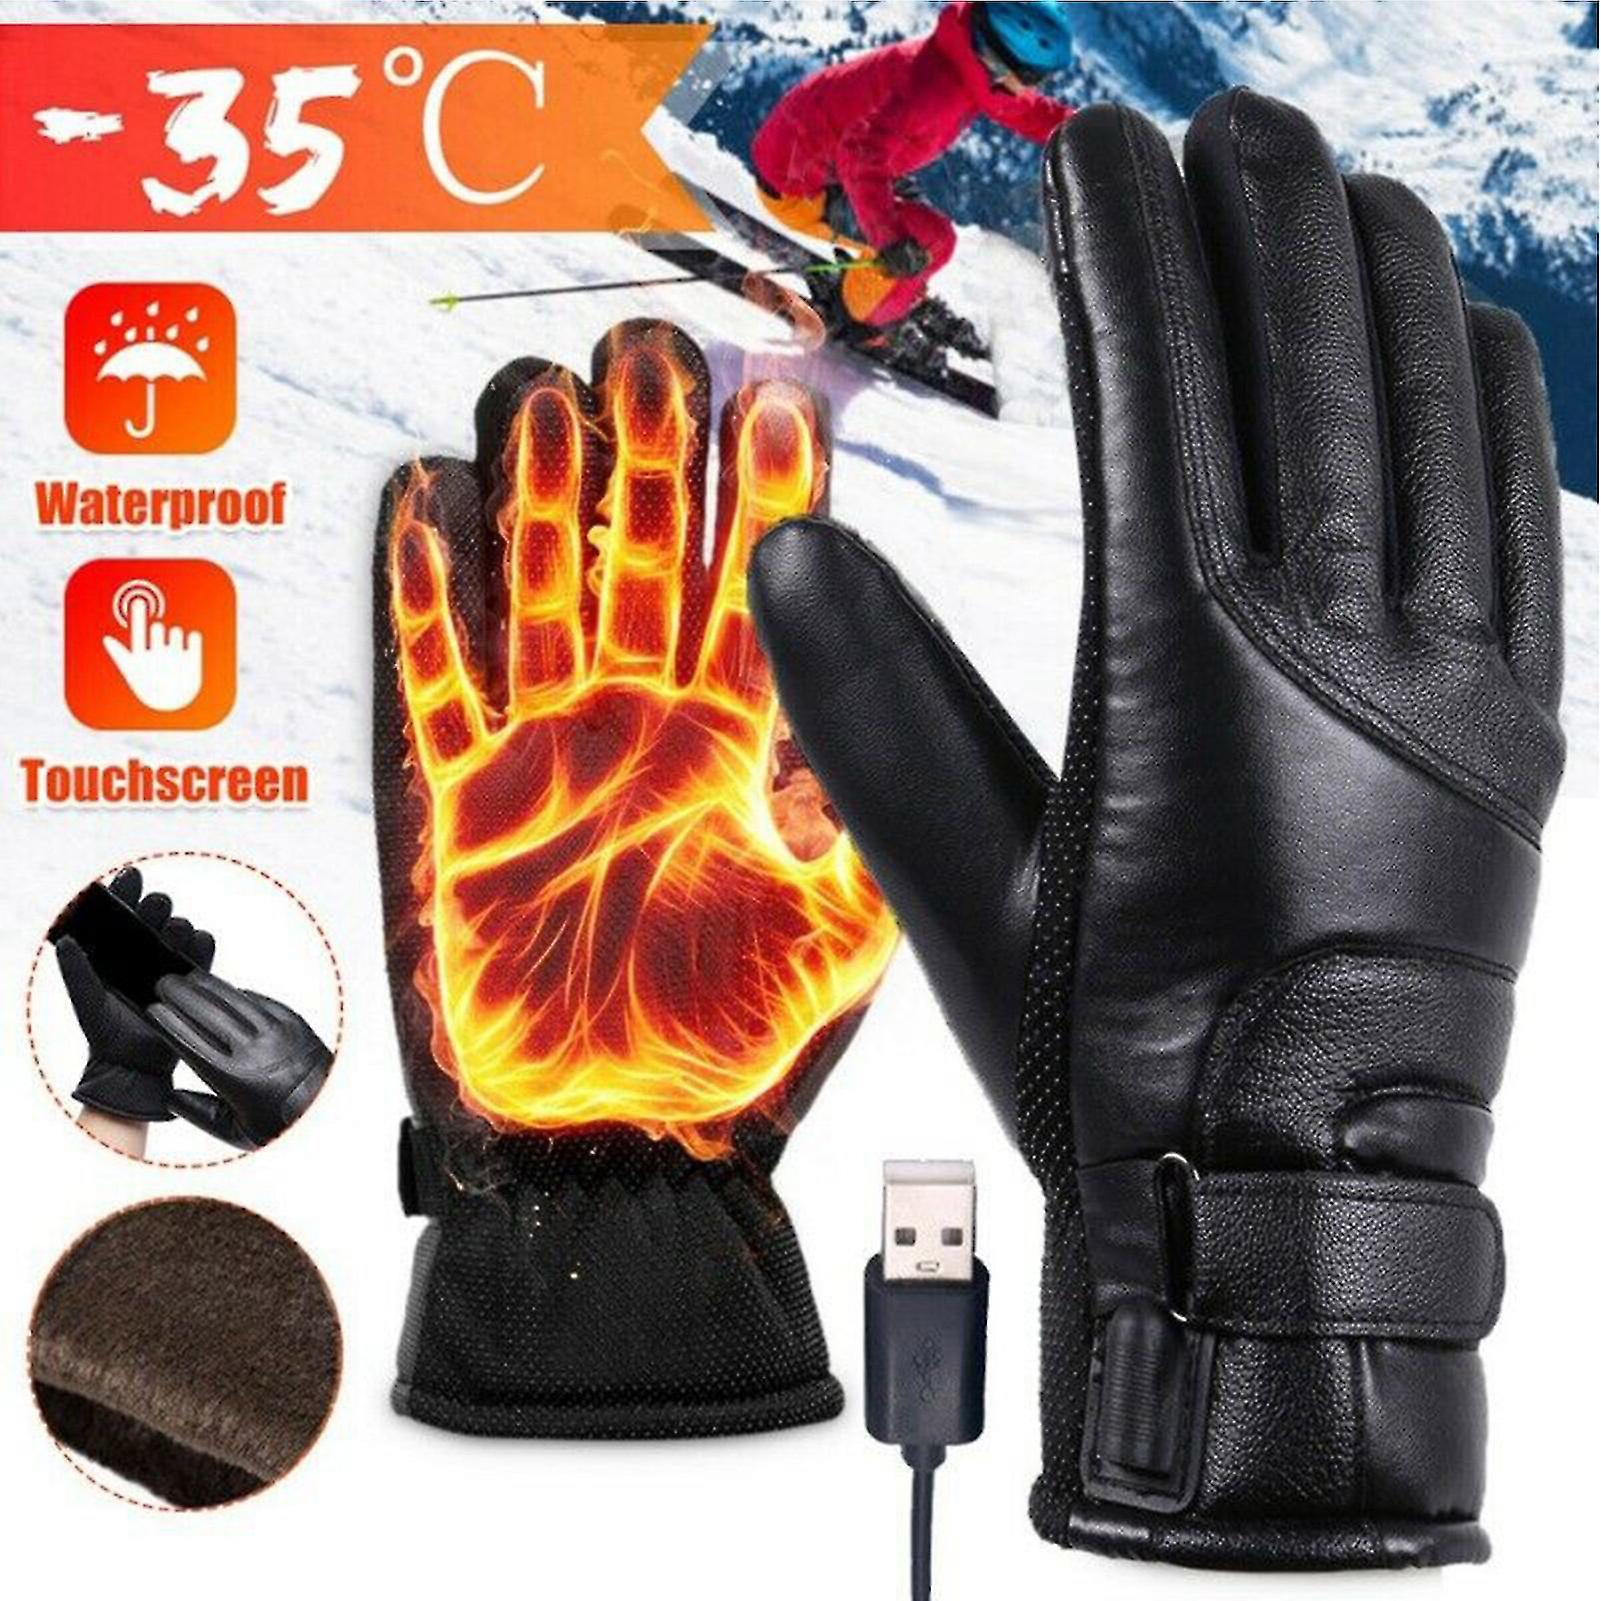 Electric Usb Heated Gloves Touchscreen Compatible Fleece For Outdoors Walking Motorcycle Bike